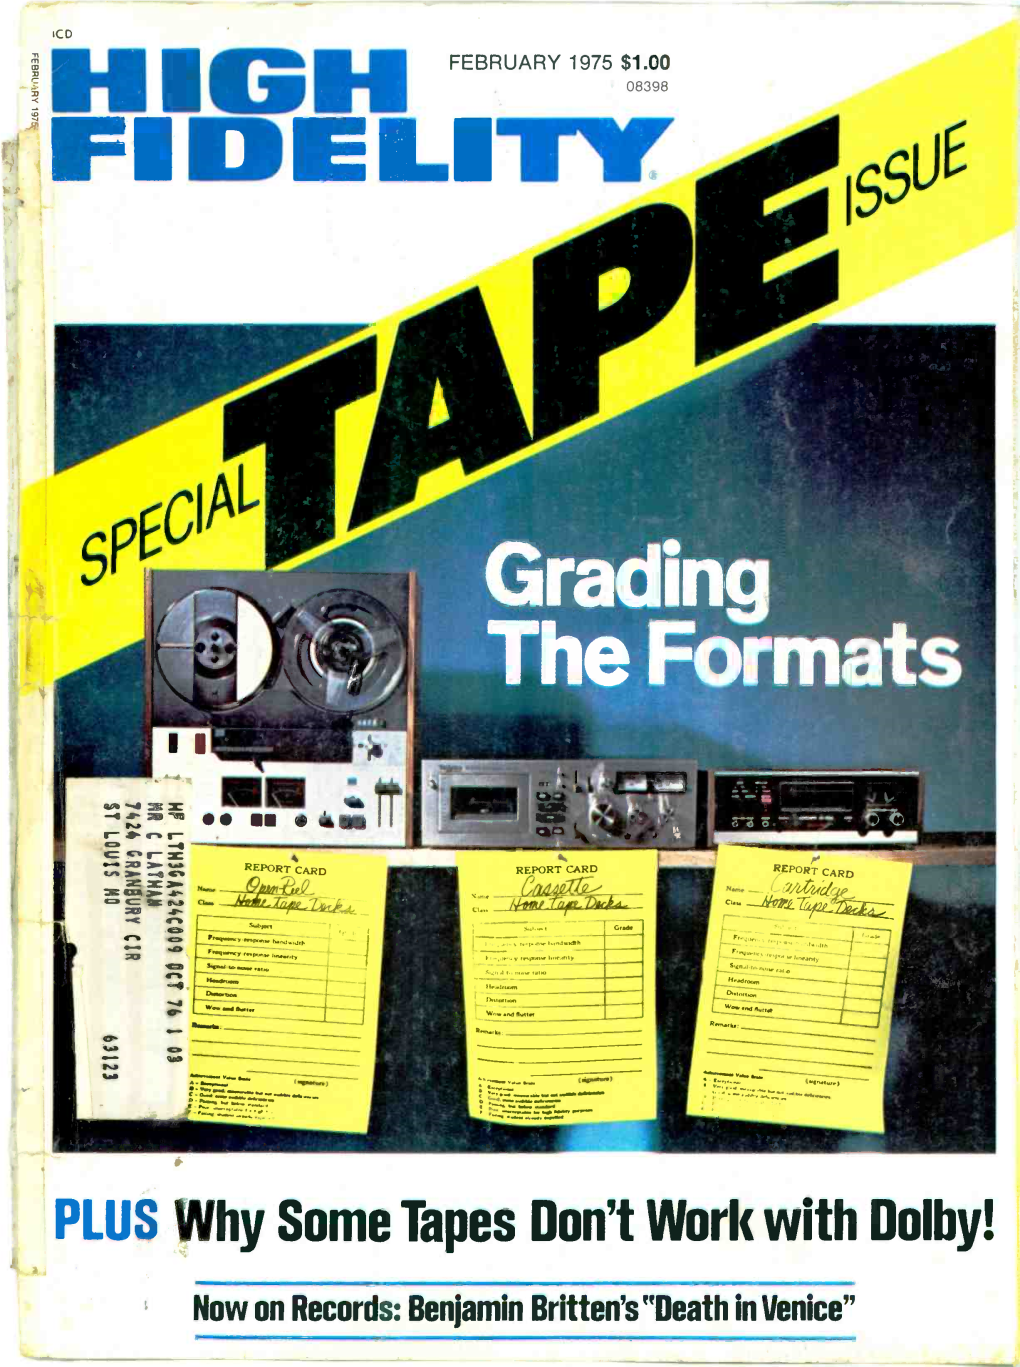 Why Some Tapes Don't Work with Dolby!